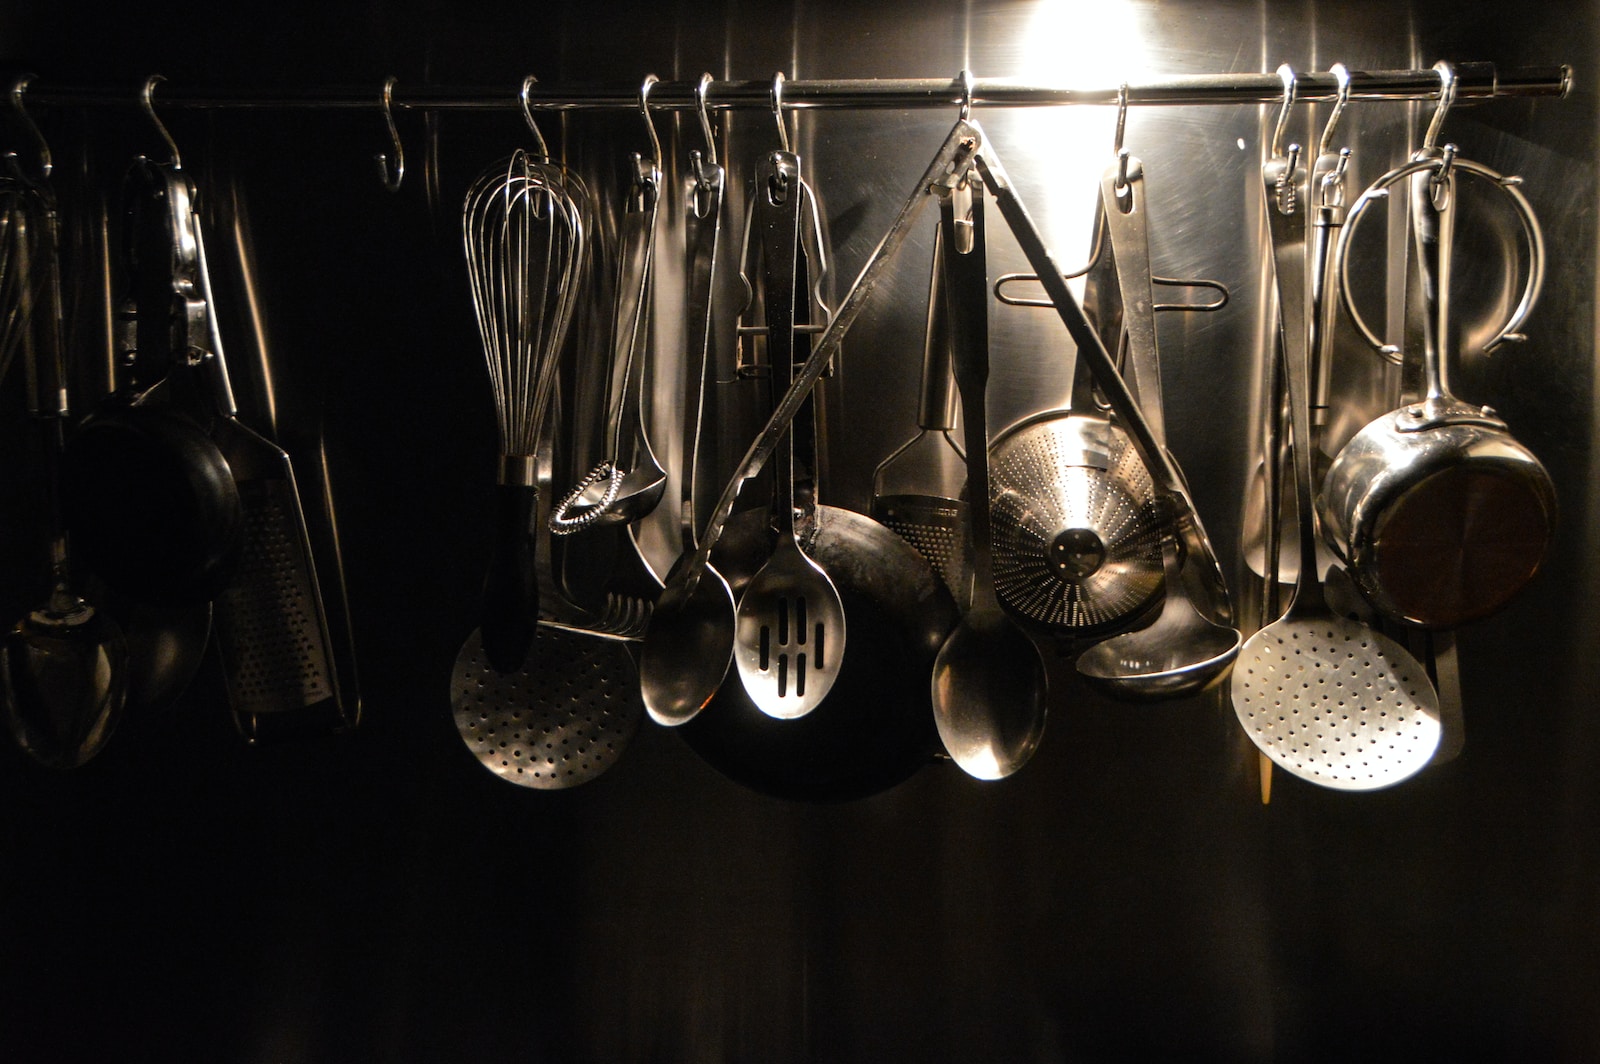 stainless steel spoons and spoons